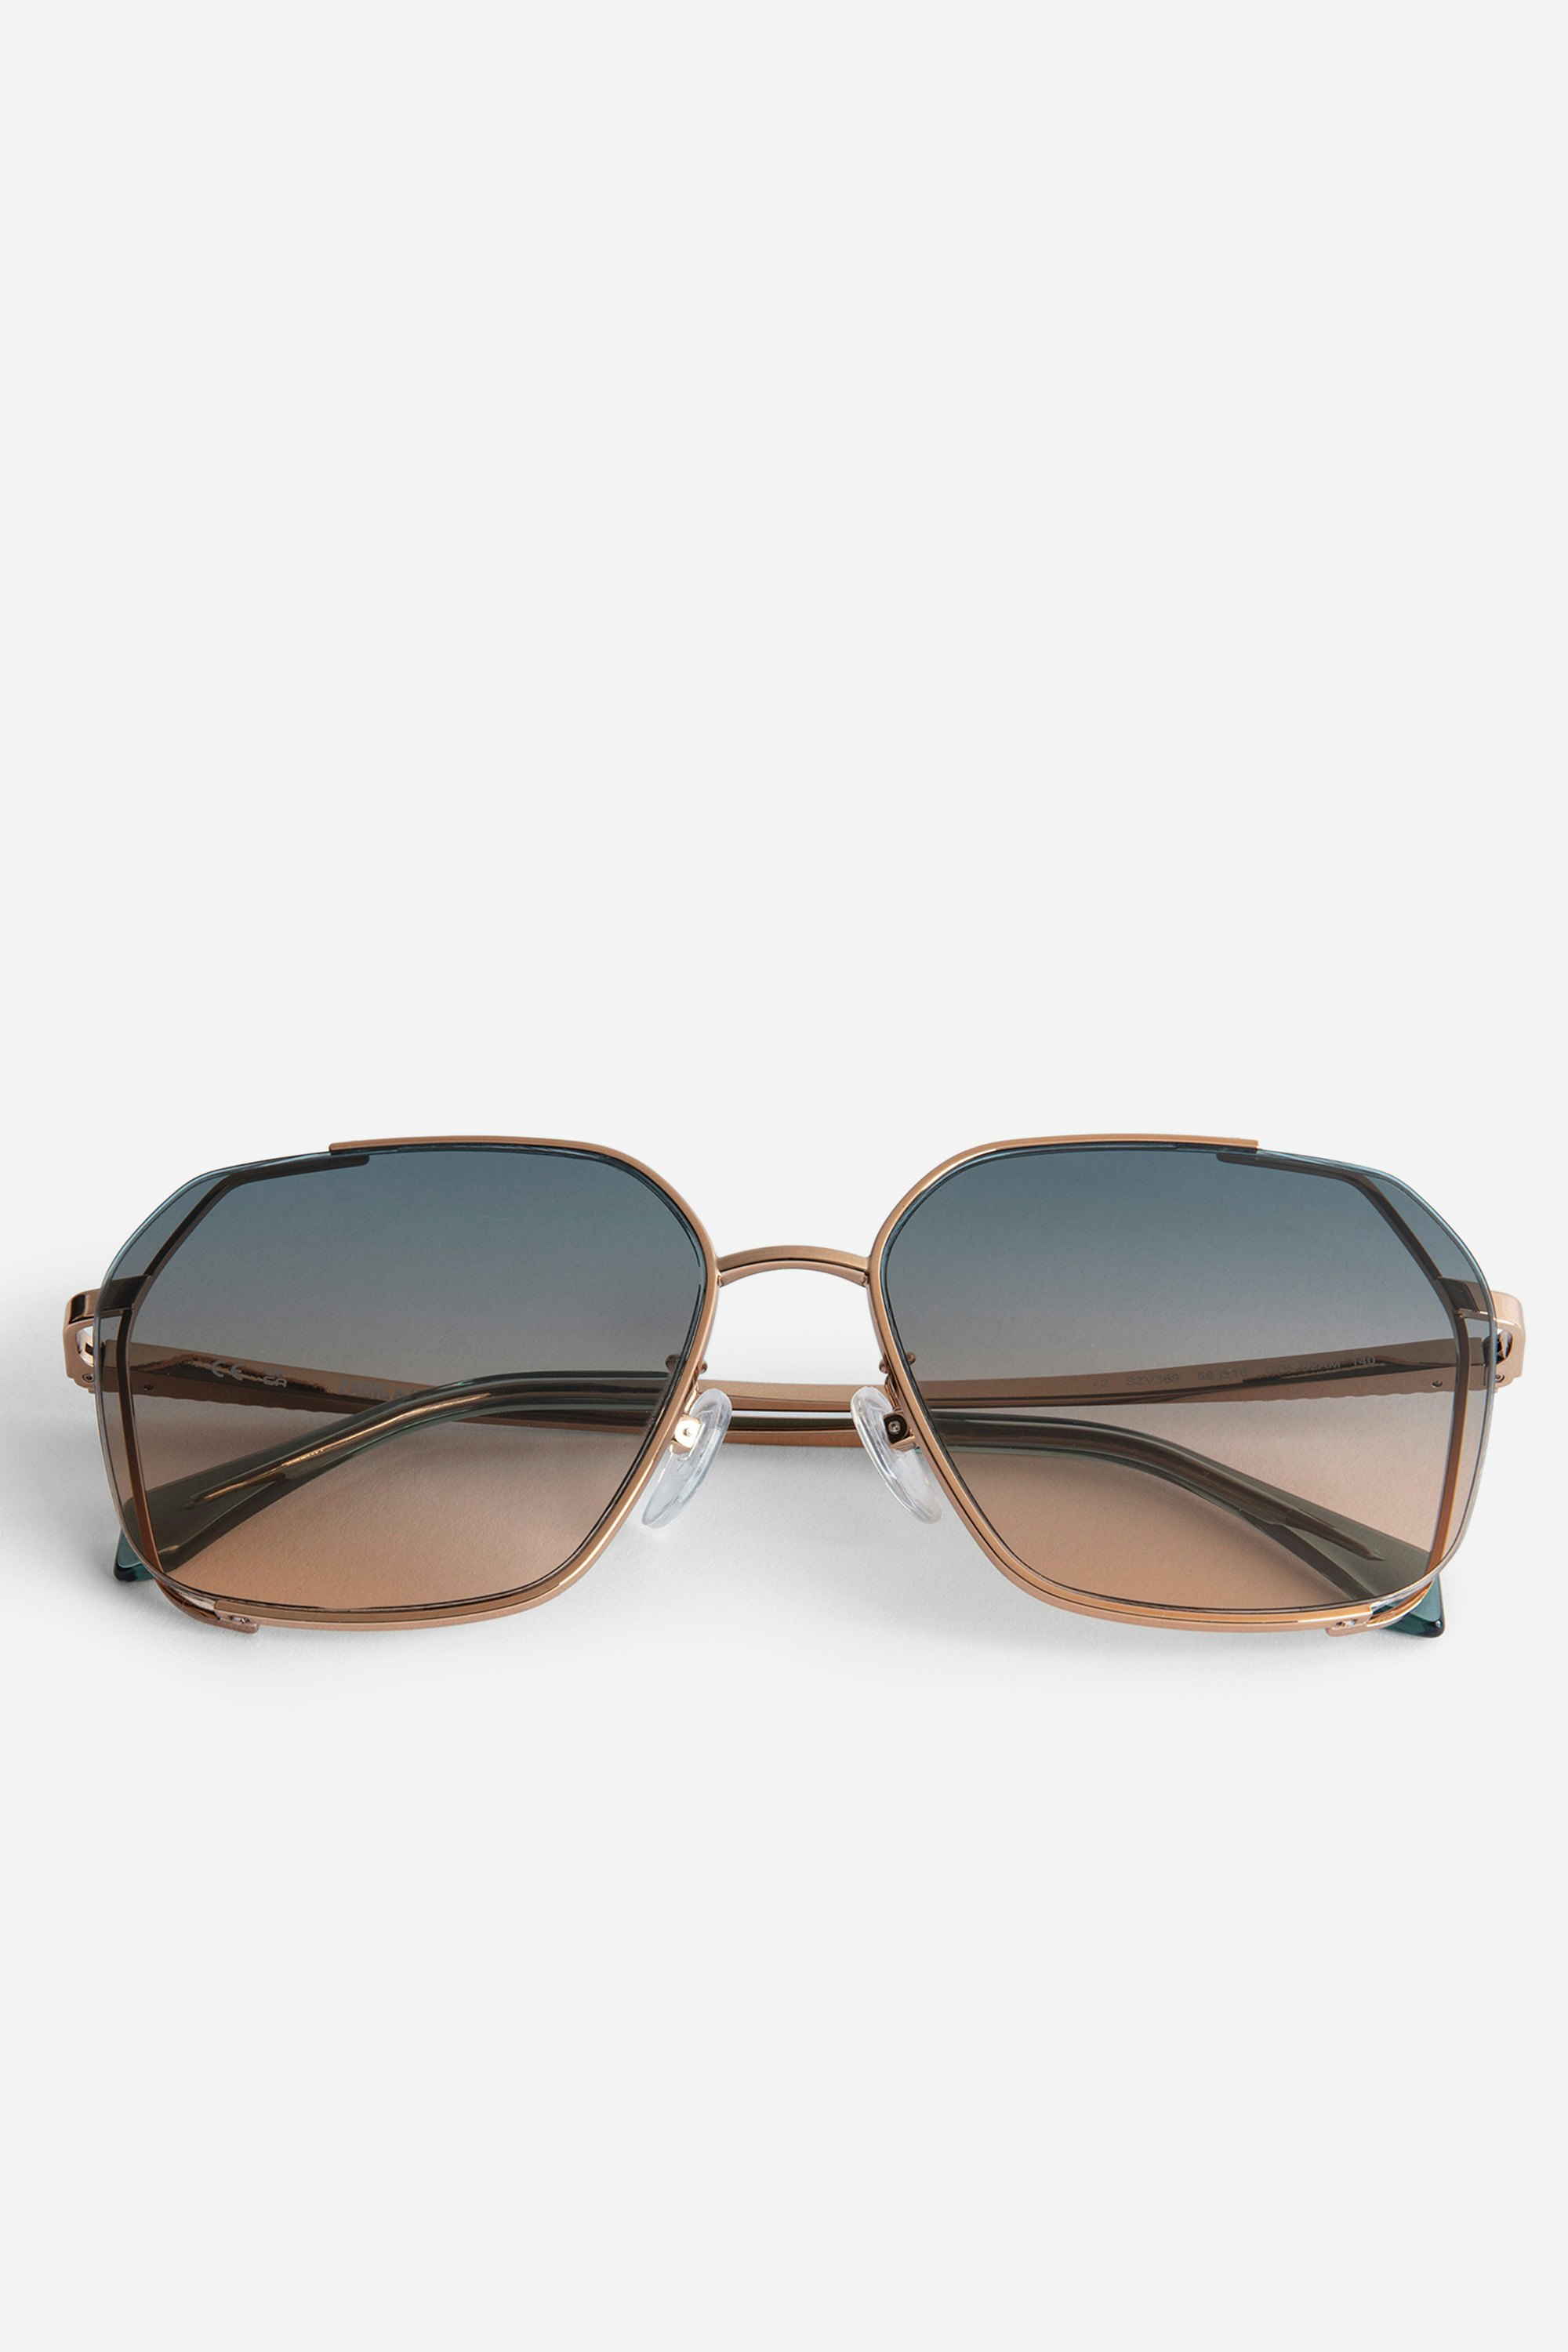 ZV23H5 Sunglasses - Unisex green rounded square sunglasses with the ZV logo on the temples.